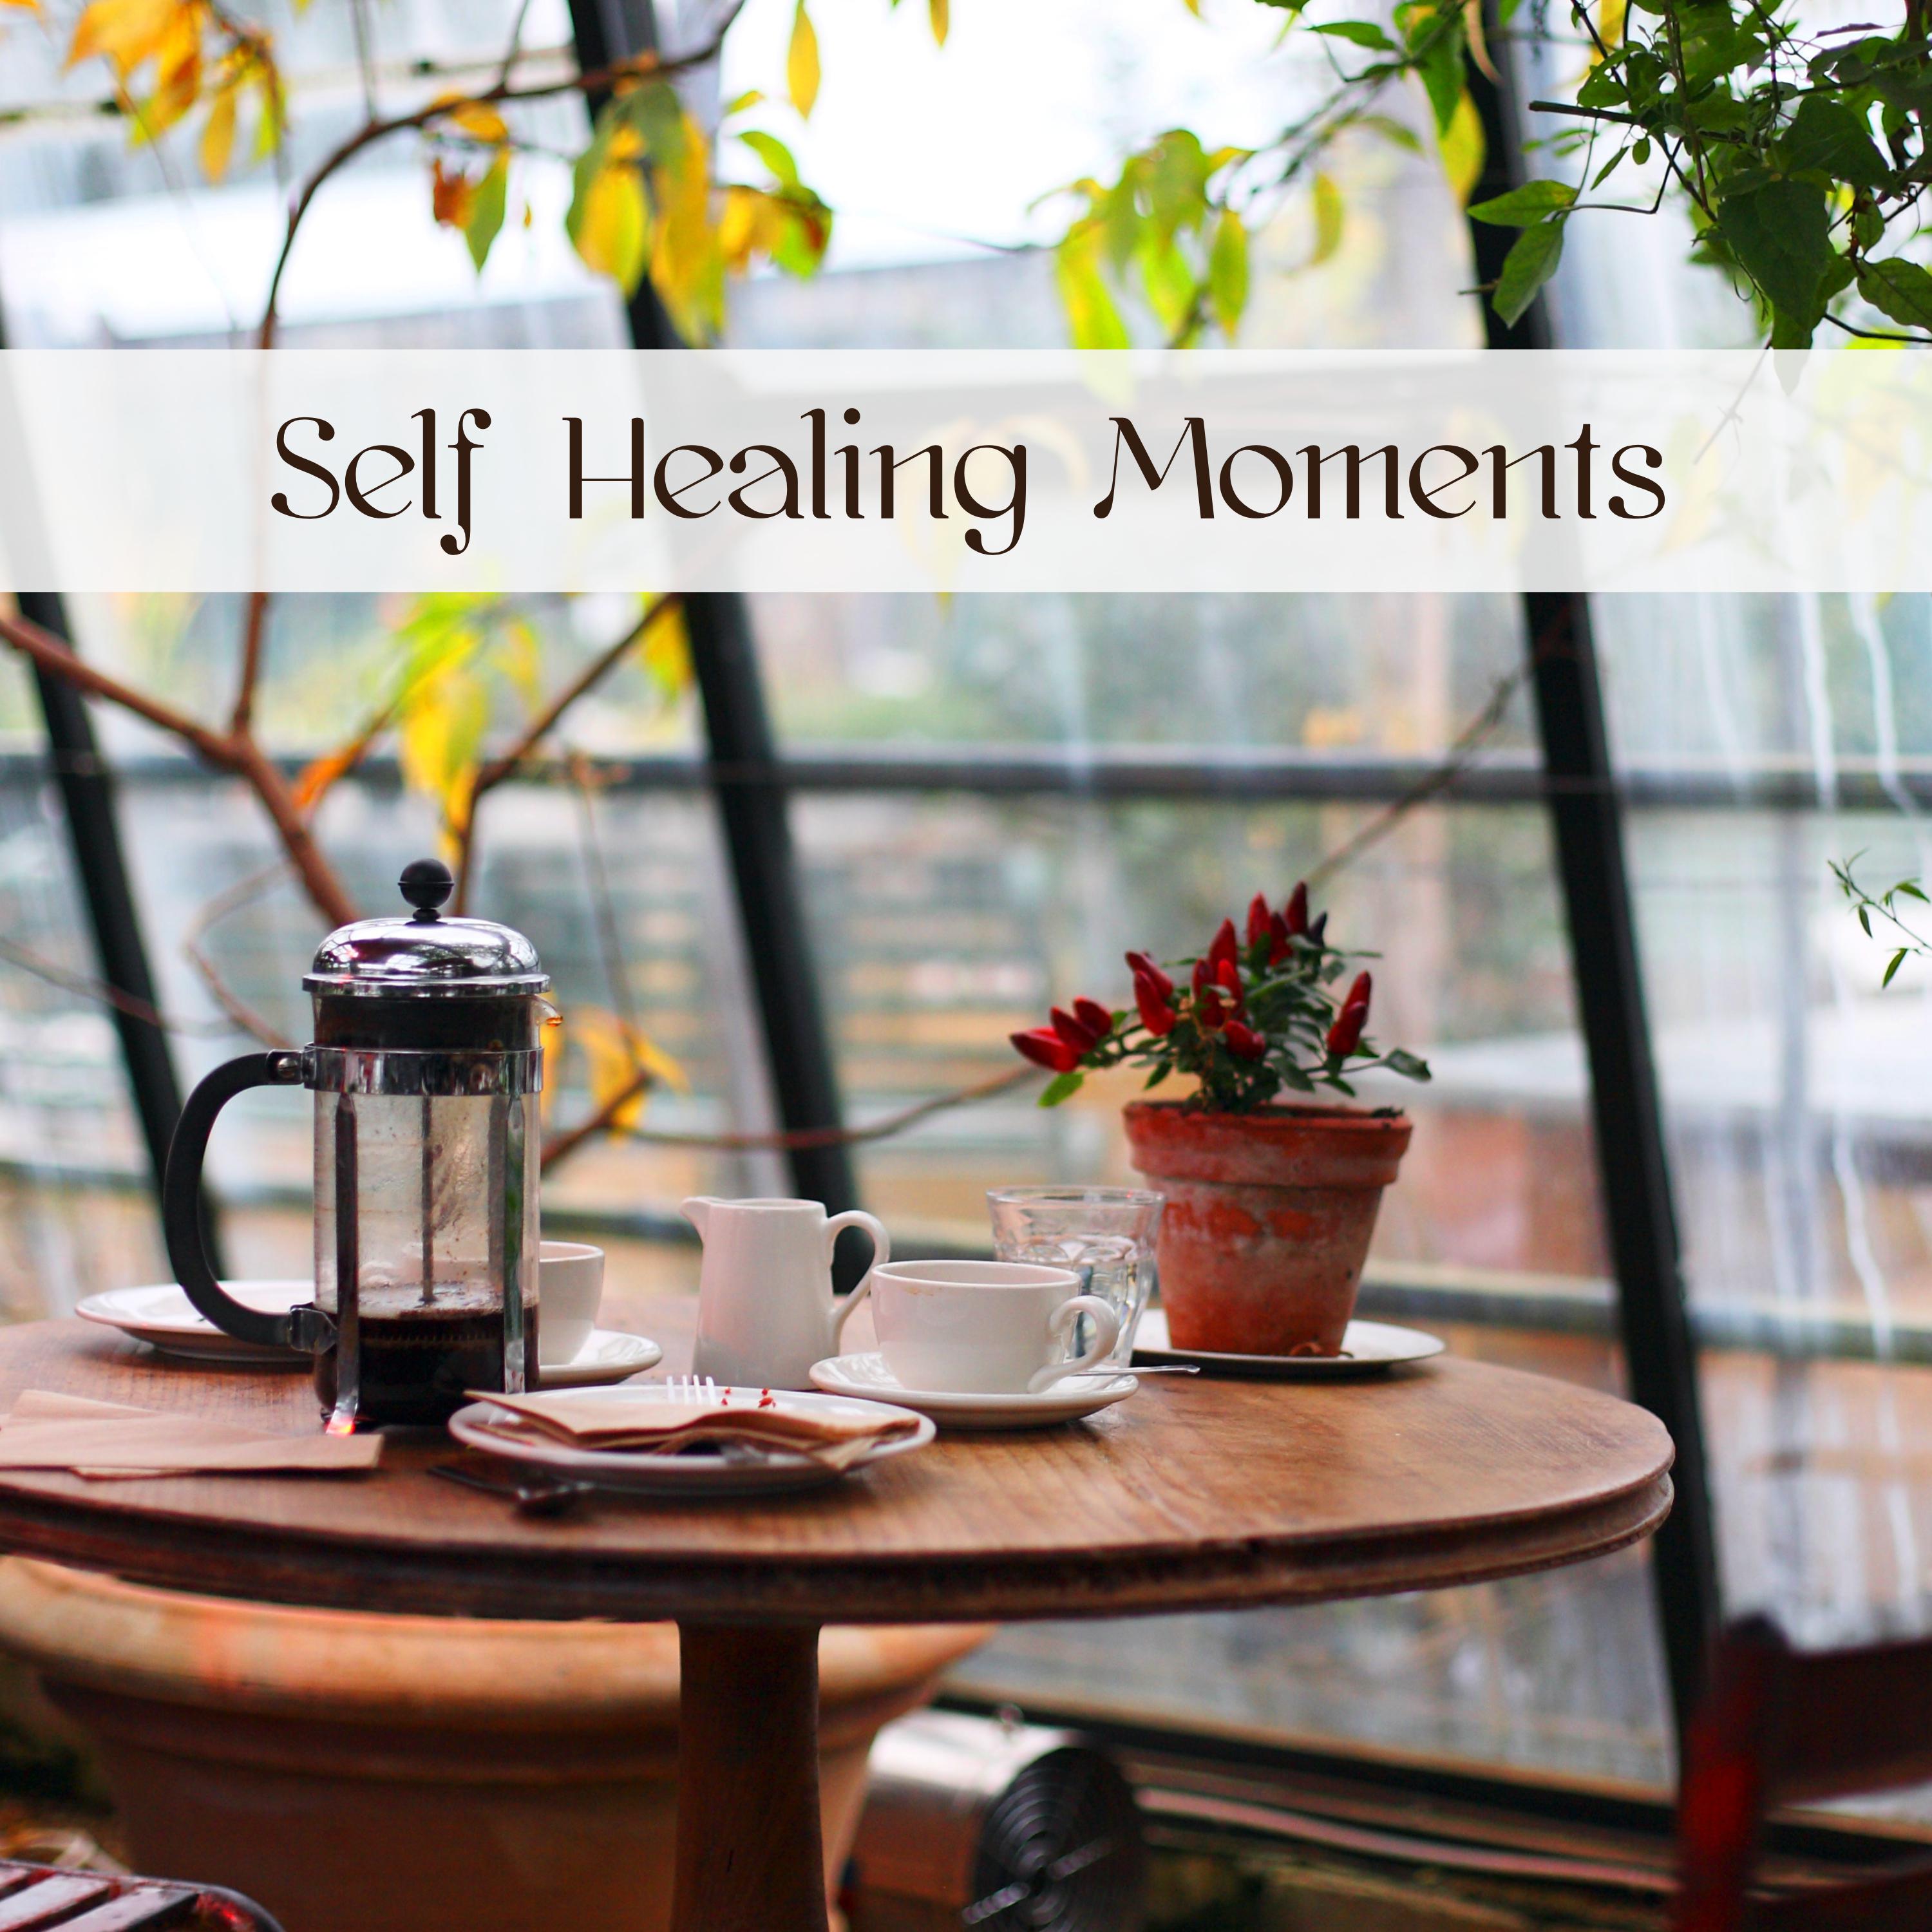 Self Healing Moments – Soothing Peaceful Songs for Quiet Moments When You Take Care of Yourself